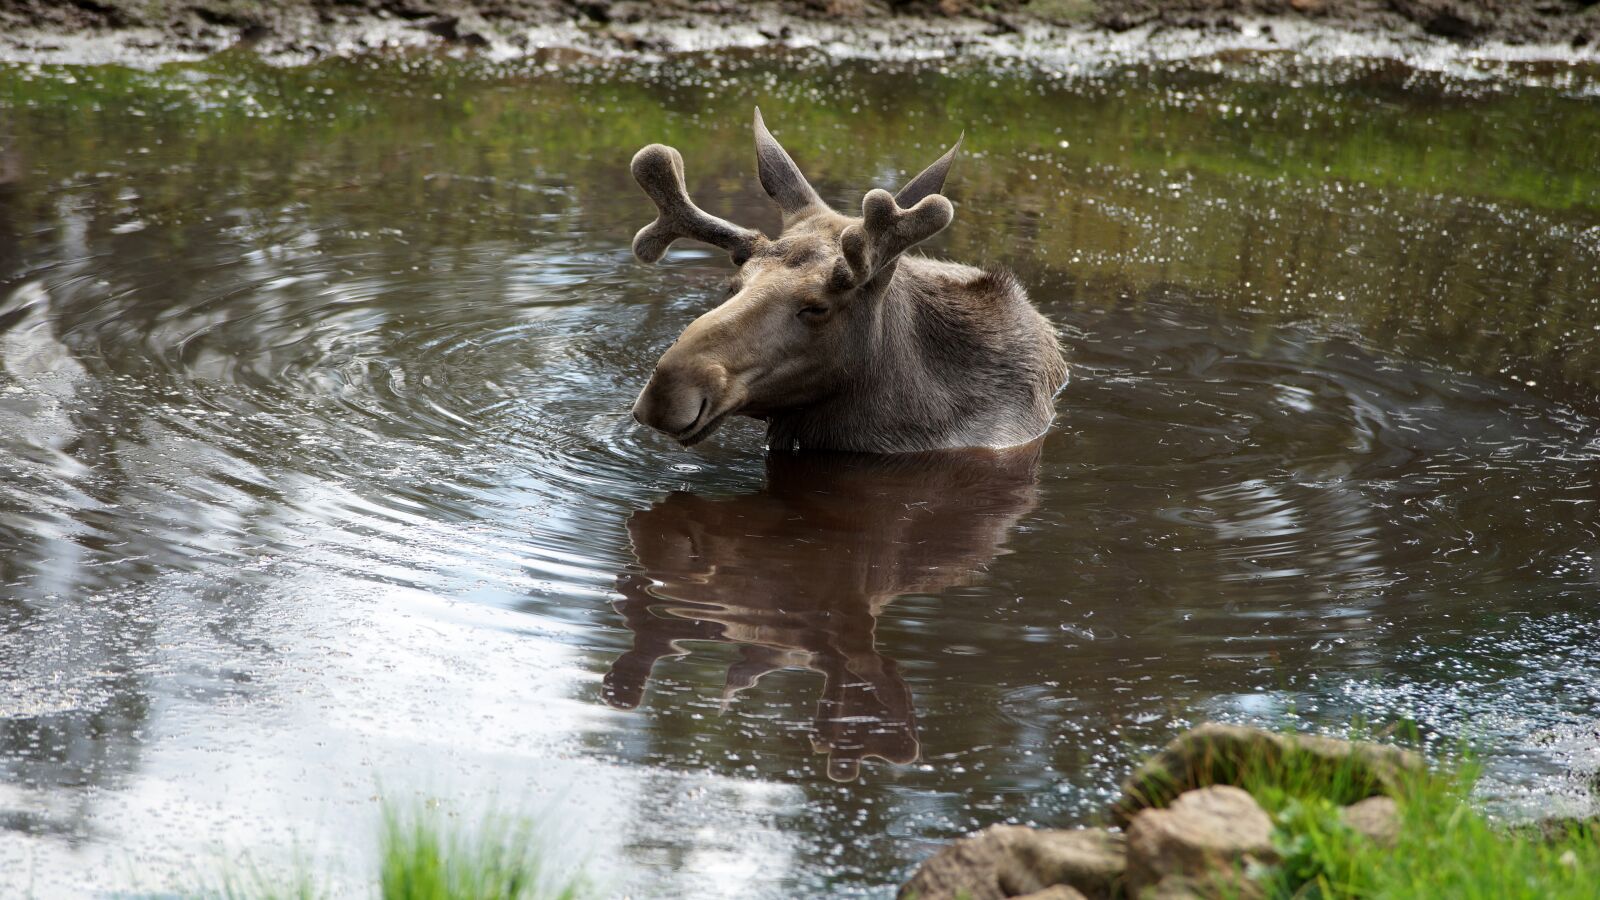 Sony a99 II sample photo. Moose, animals, nature photography